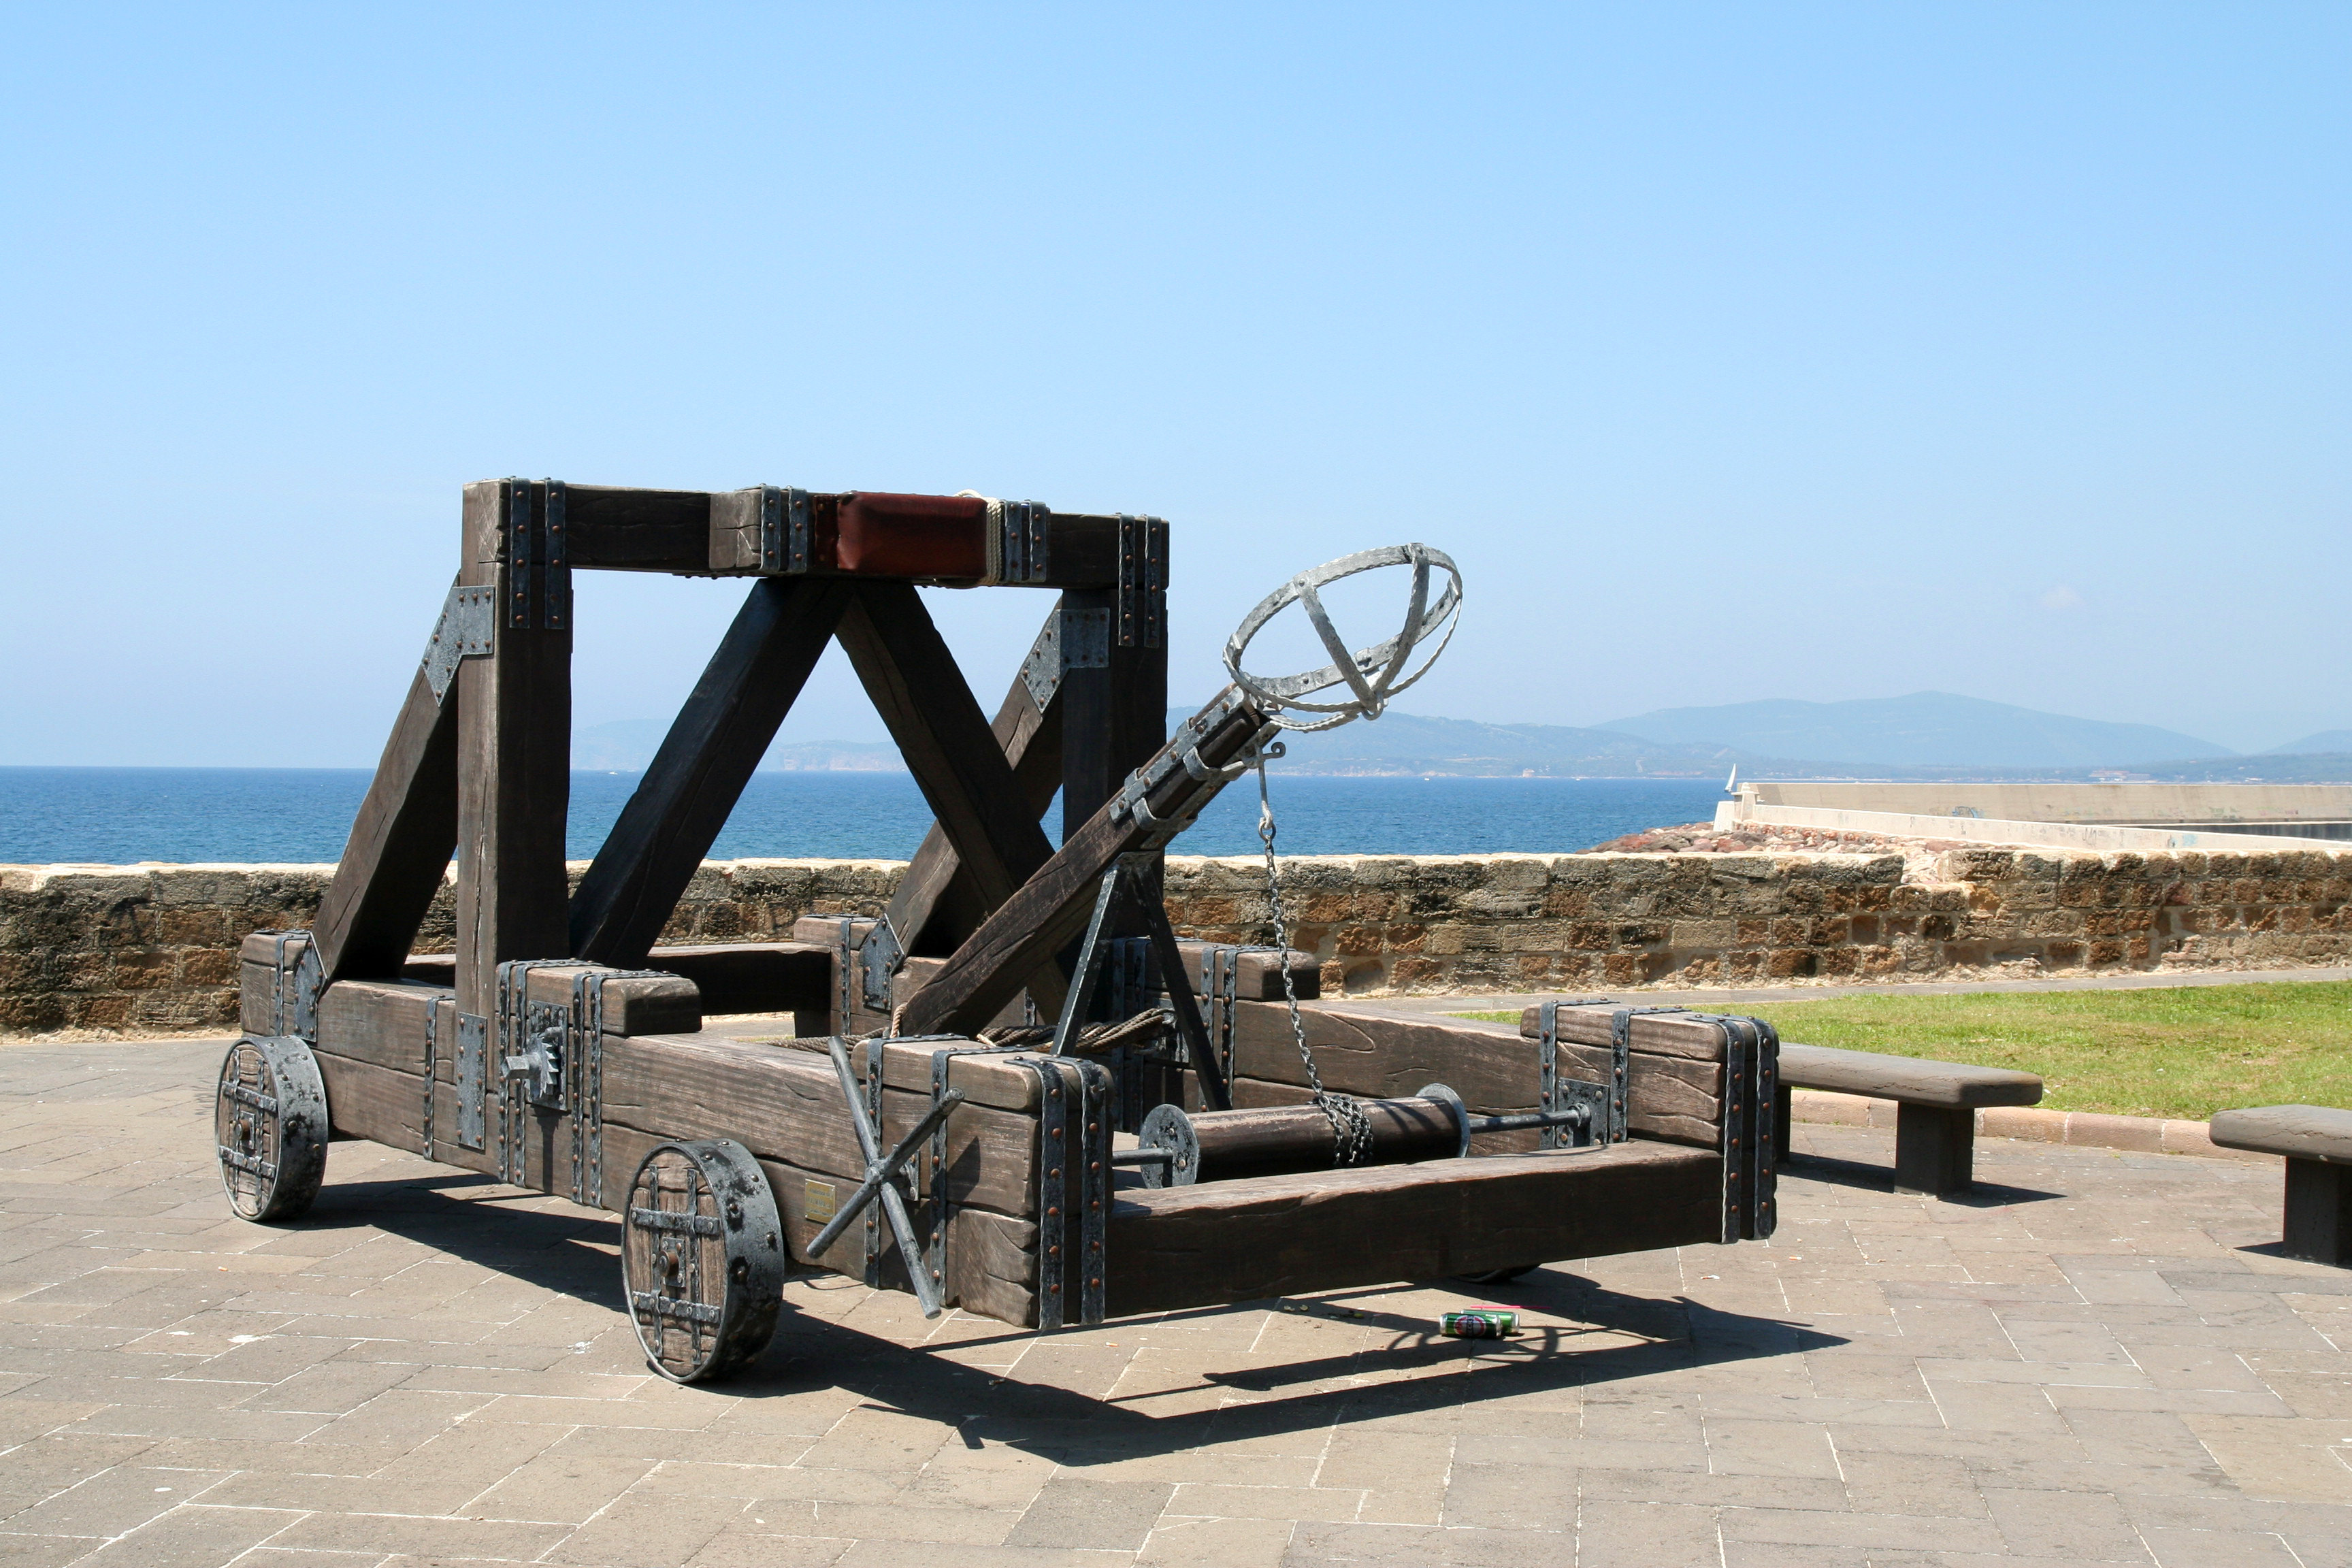 Do You Know That Greeks Invented the Catapult?